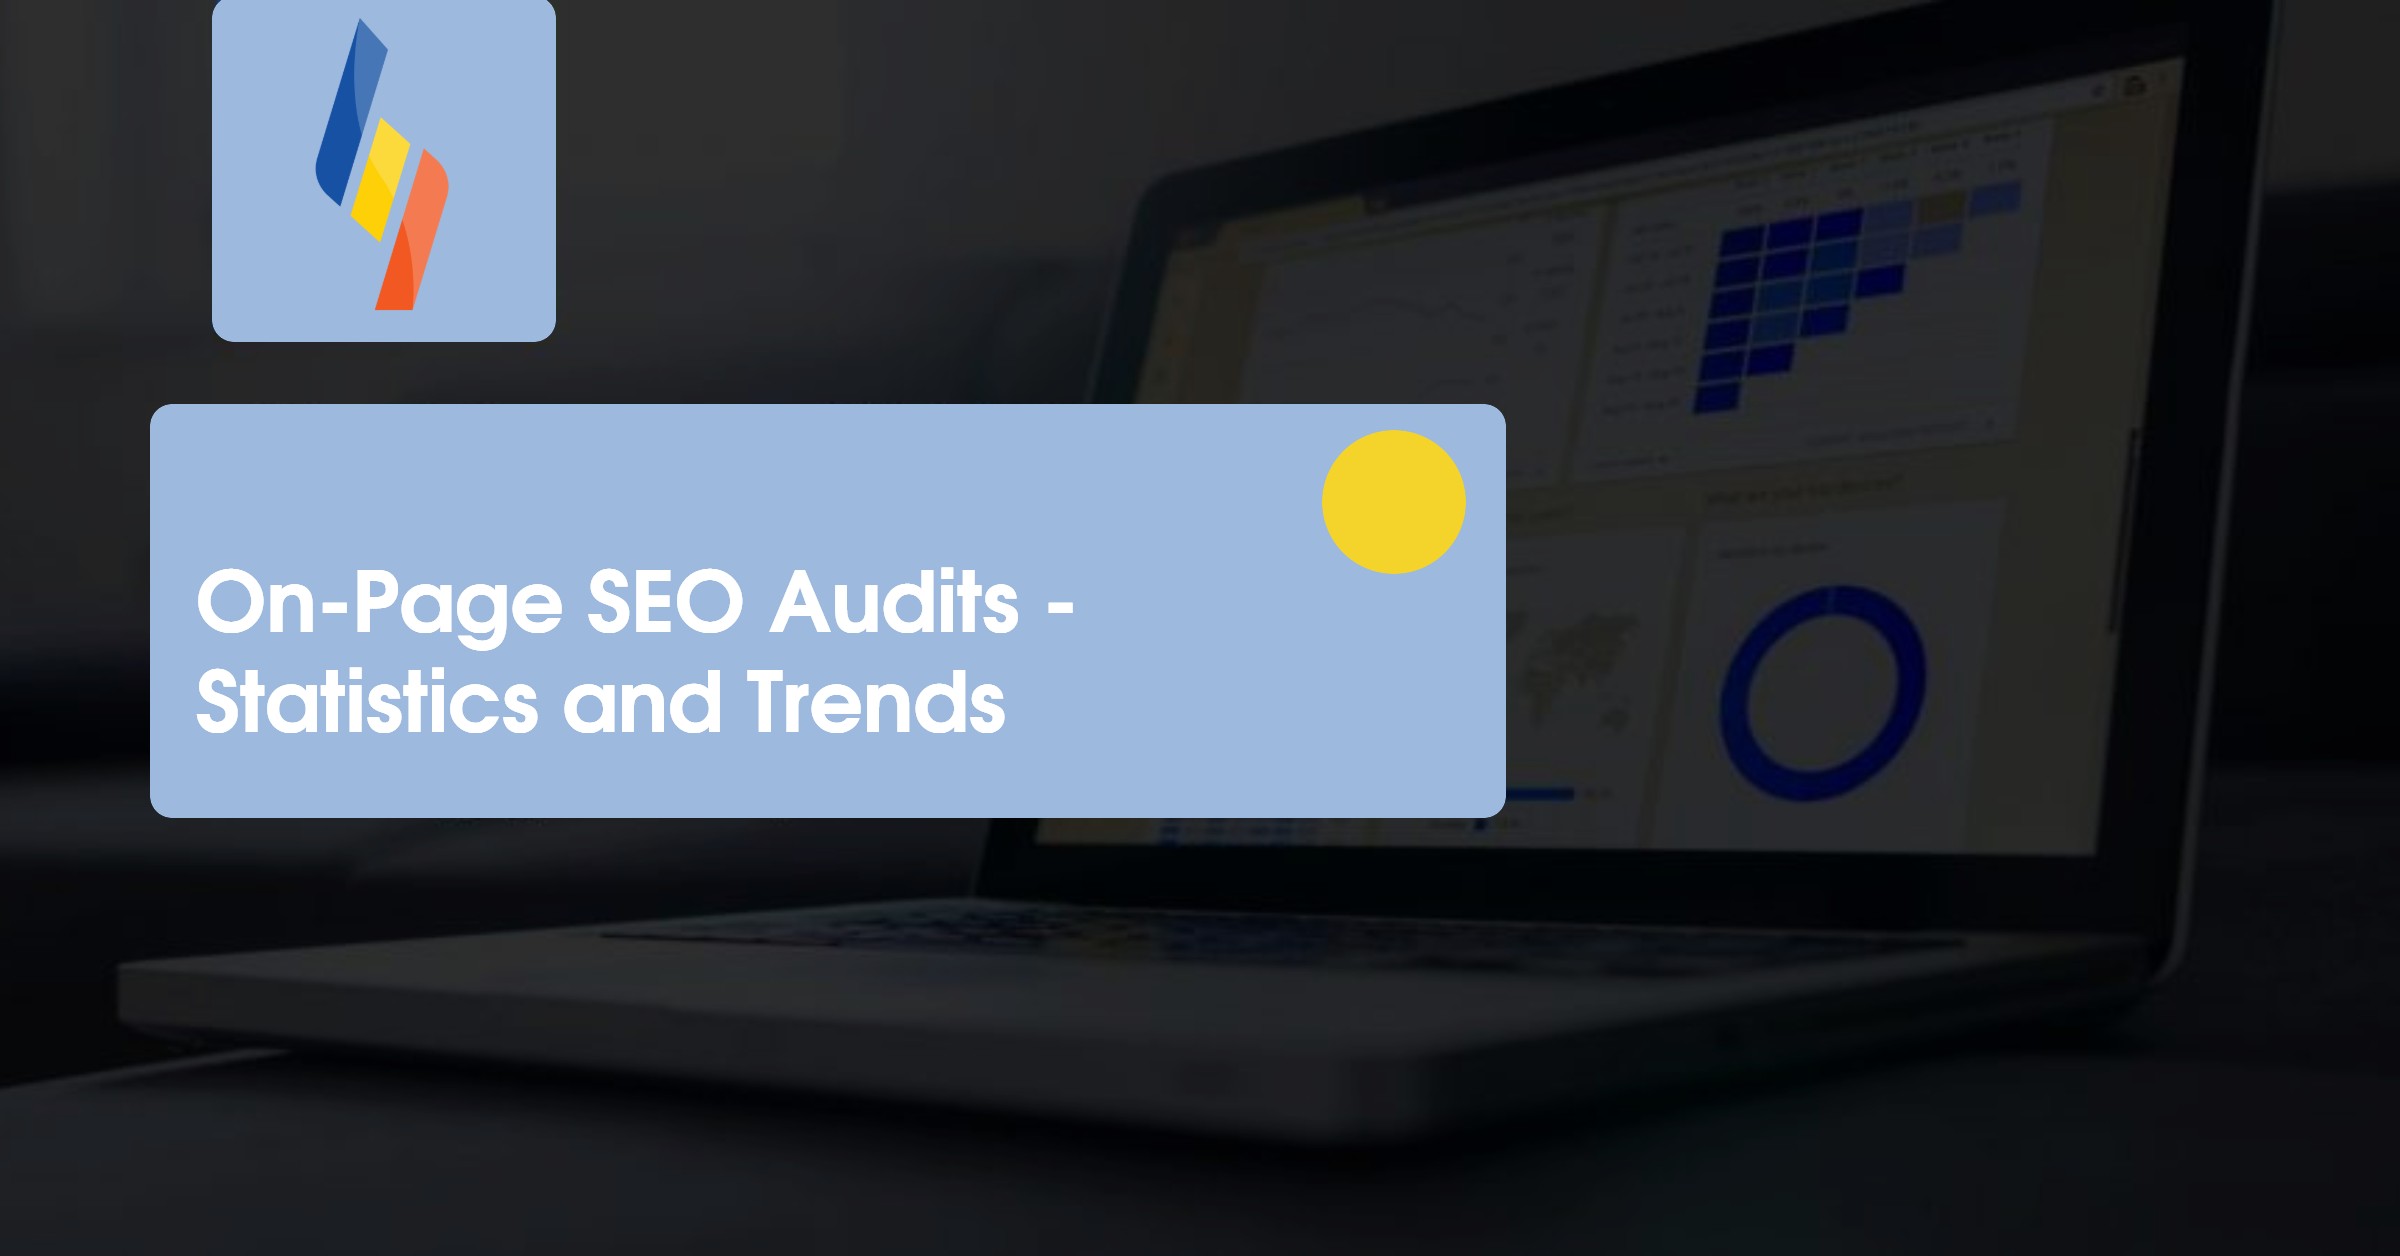 On-Page SEO Audits - Statistics and Trends